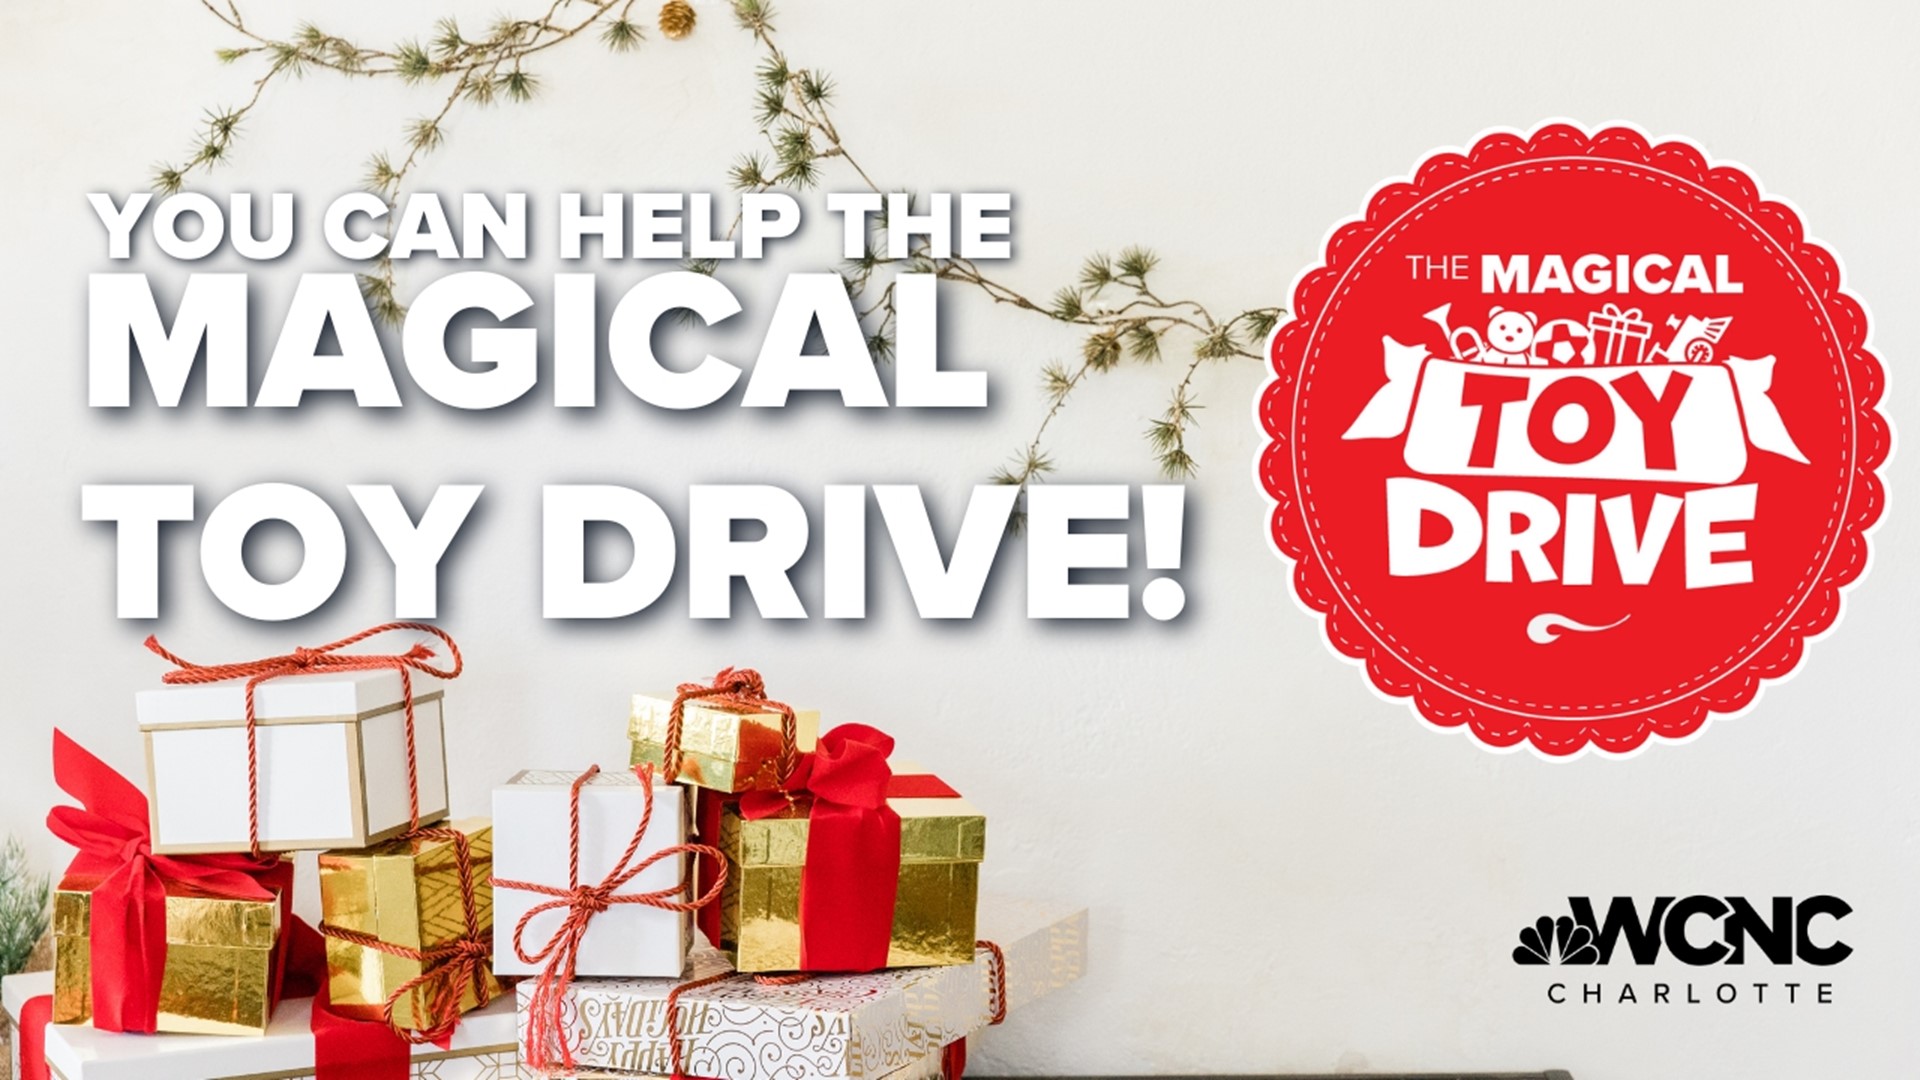 There's still plenty of time to give and help kids have a happy holiday season!